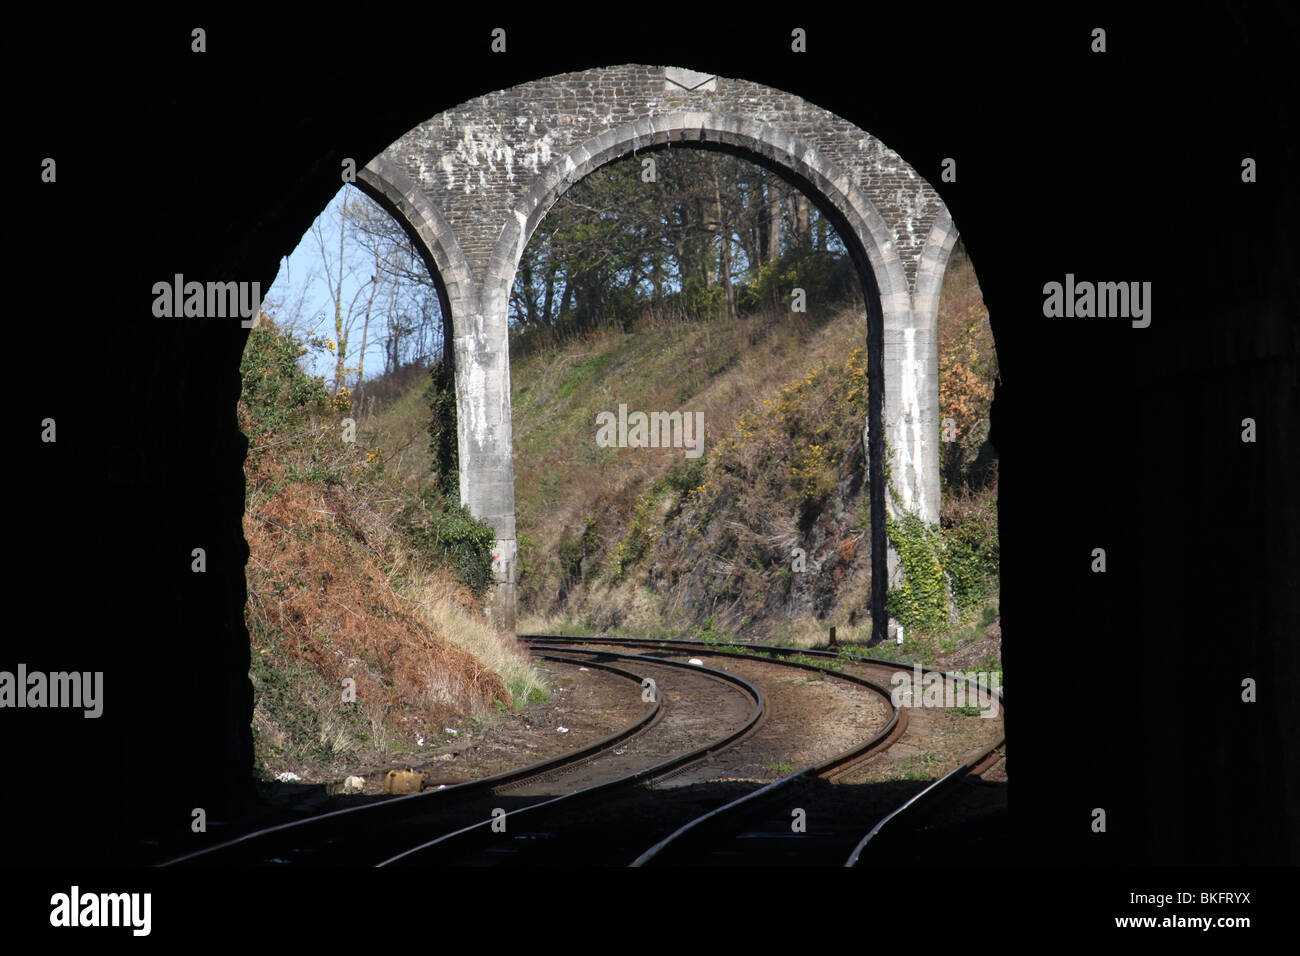 North West along the railway line from Conway (Conwy) station looking through a tunnel to the arches of a bridge. Stock Photo